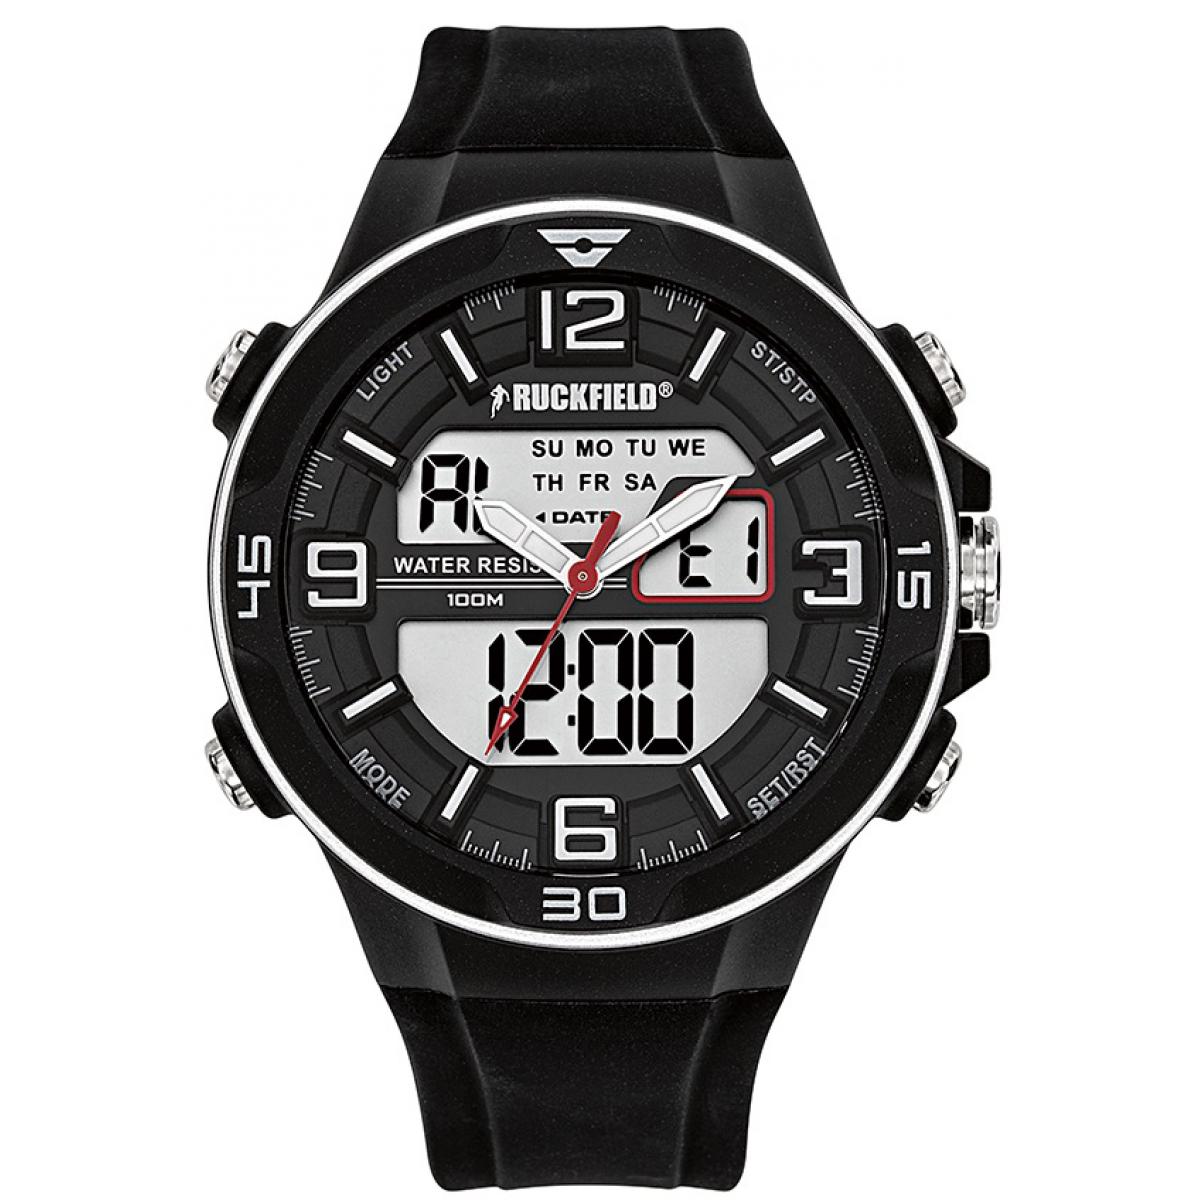 Montre Ruckfield 685061 - Multifonction Ana-digital Silicone Noir Homme